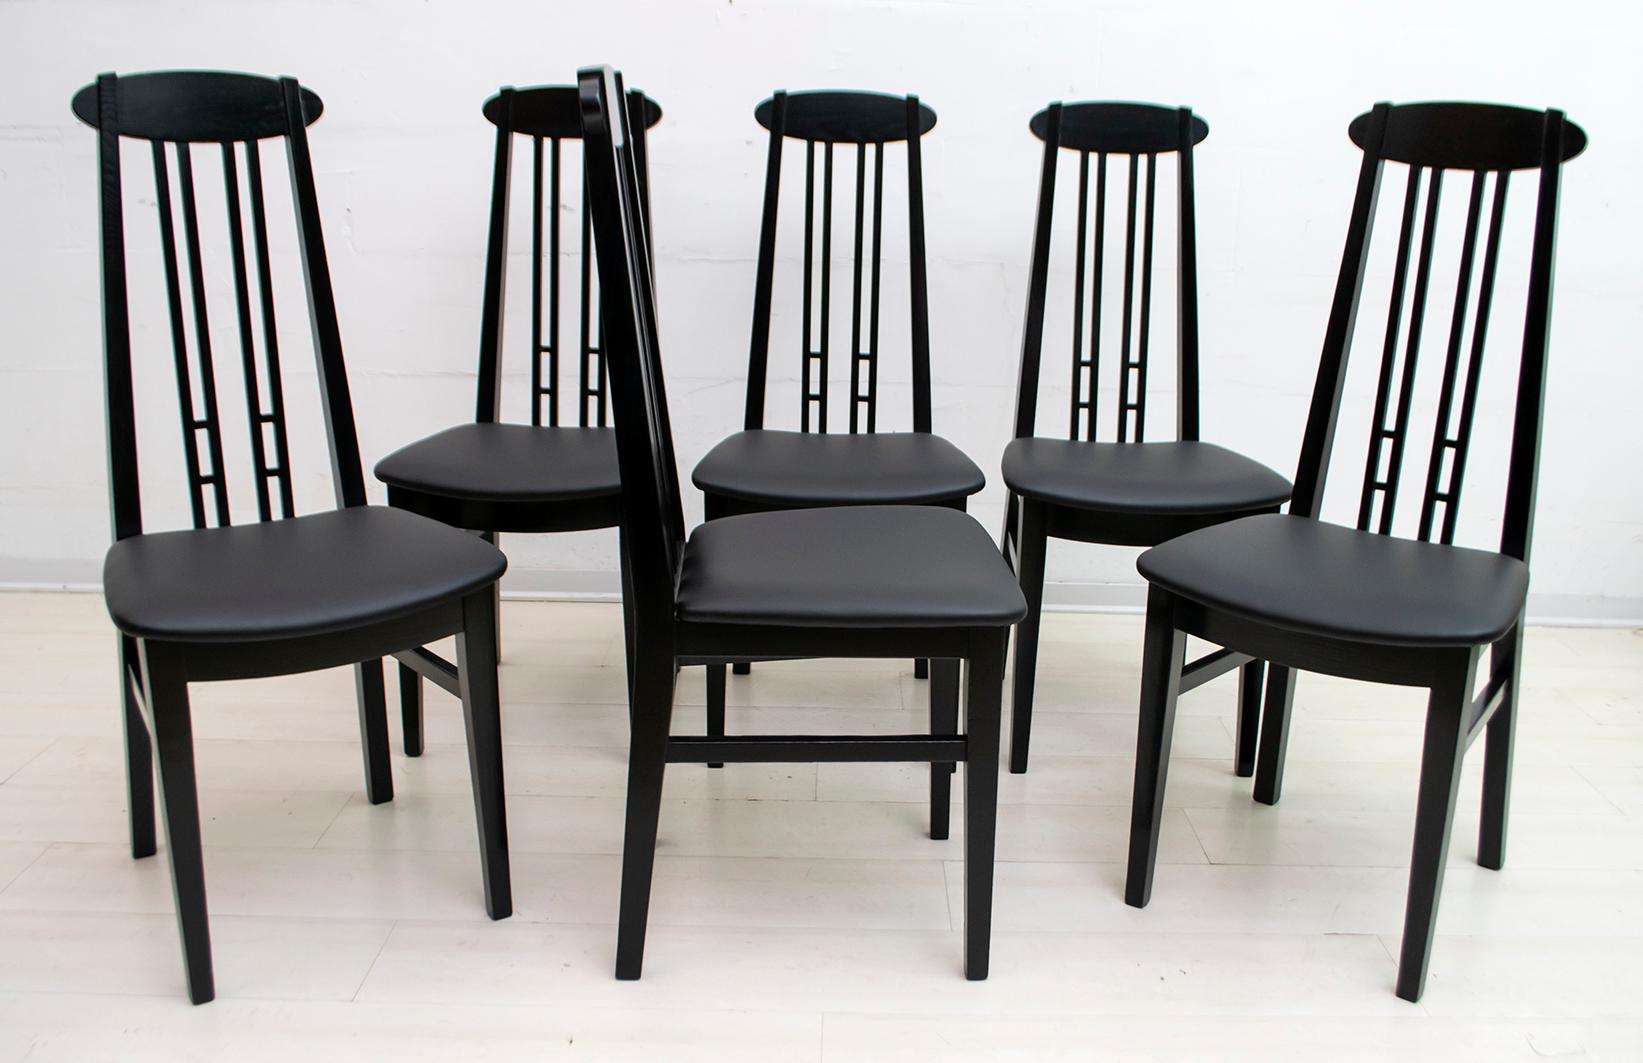 In the style of the Scottish architect Charles Rennie Mackintosh. These six chairs, solidly built in black lacquered ashwood, with black leather upholstery, late 1970s.